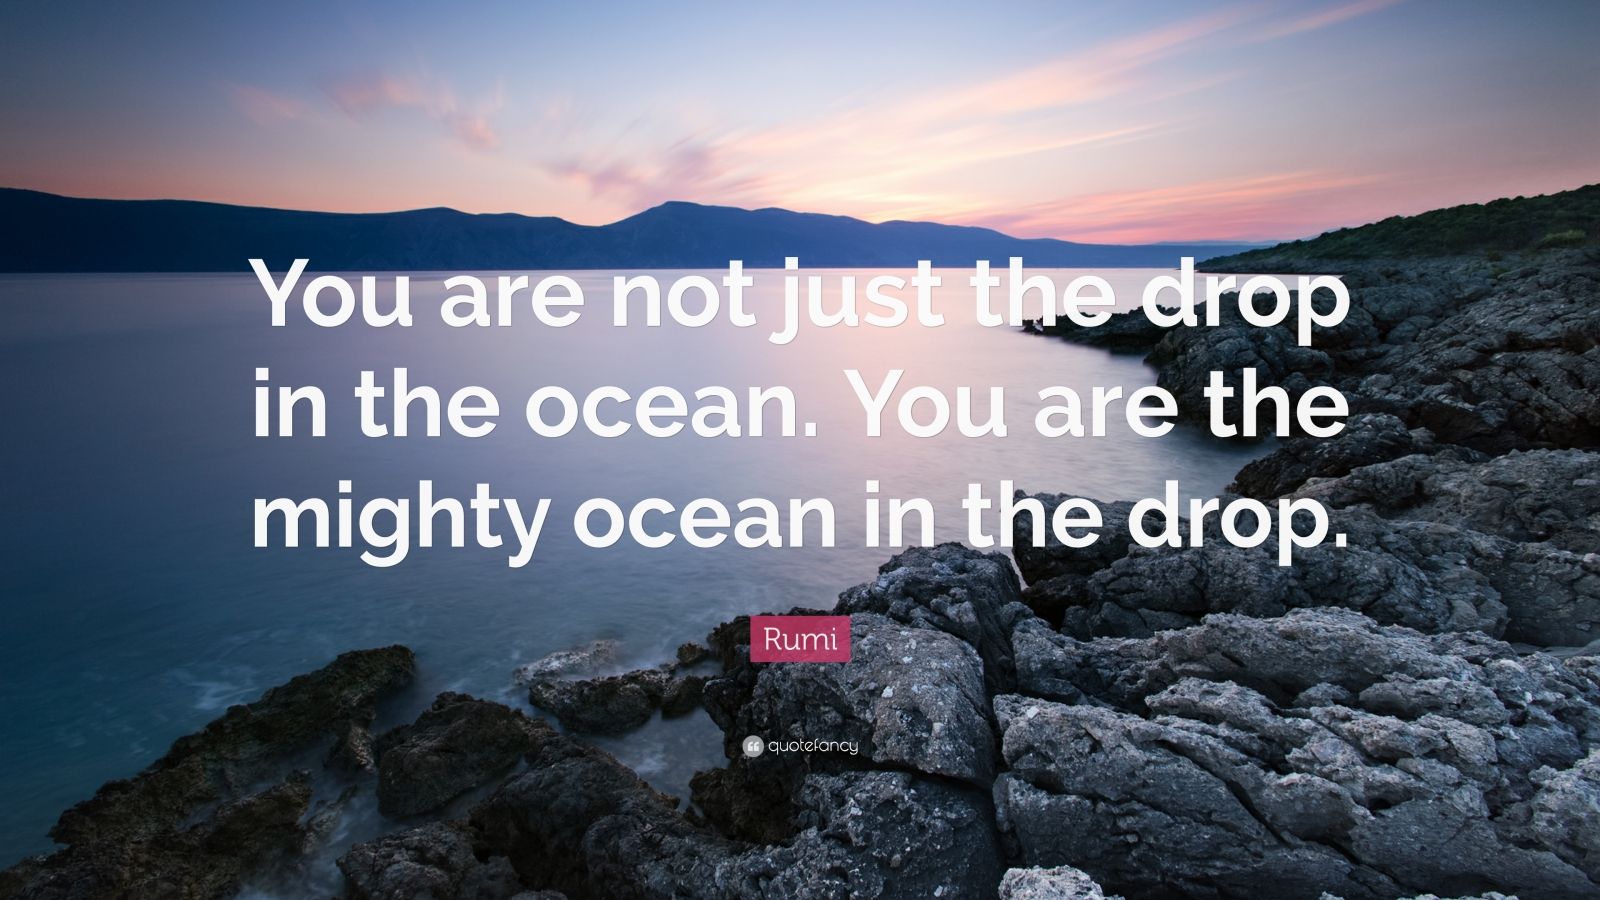 Rumi Quote: “You are not just the drop in the ocean. You are the mighty ...